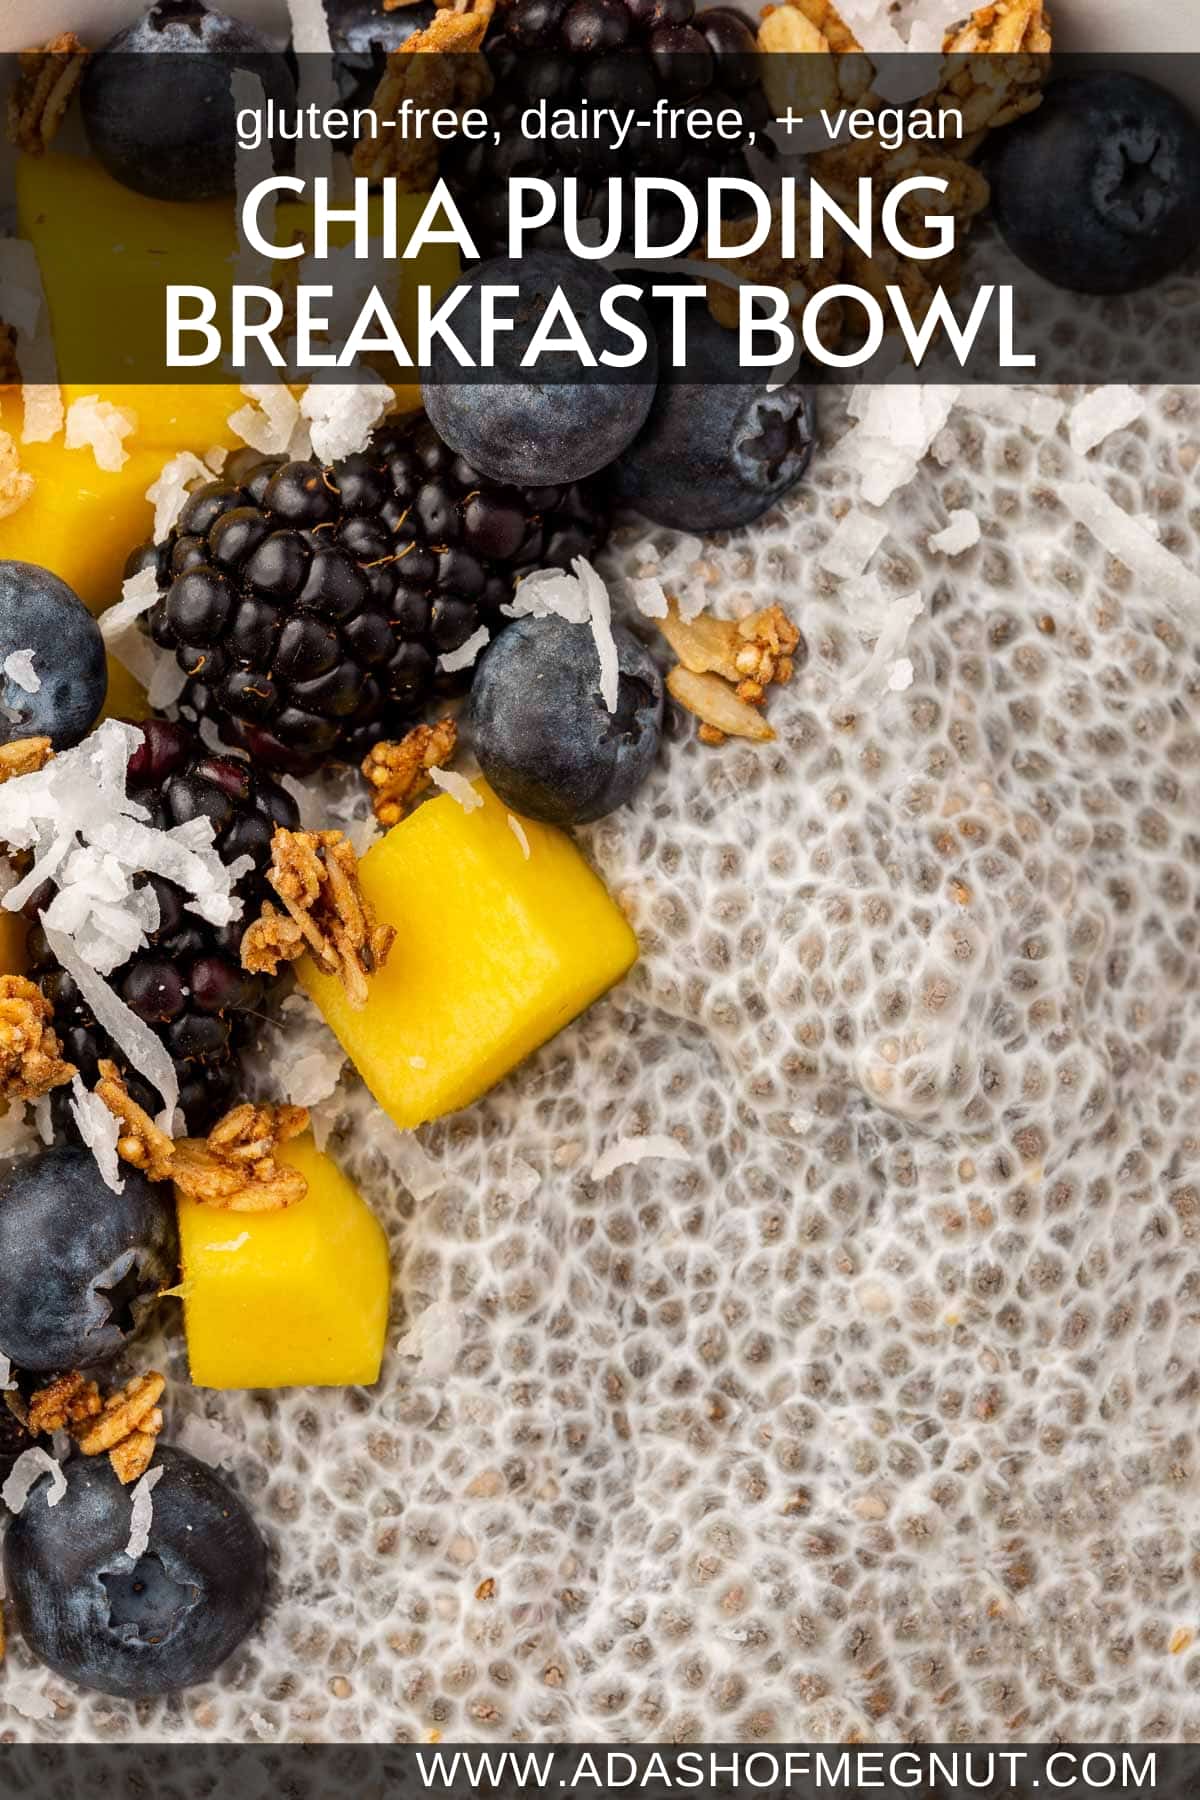 A close up of chia pudding with blackberries, cubed mango, blueberries, coconut shreds and gluten-free granola.